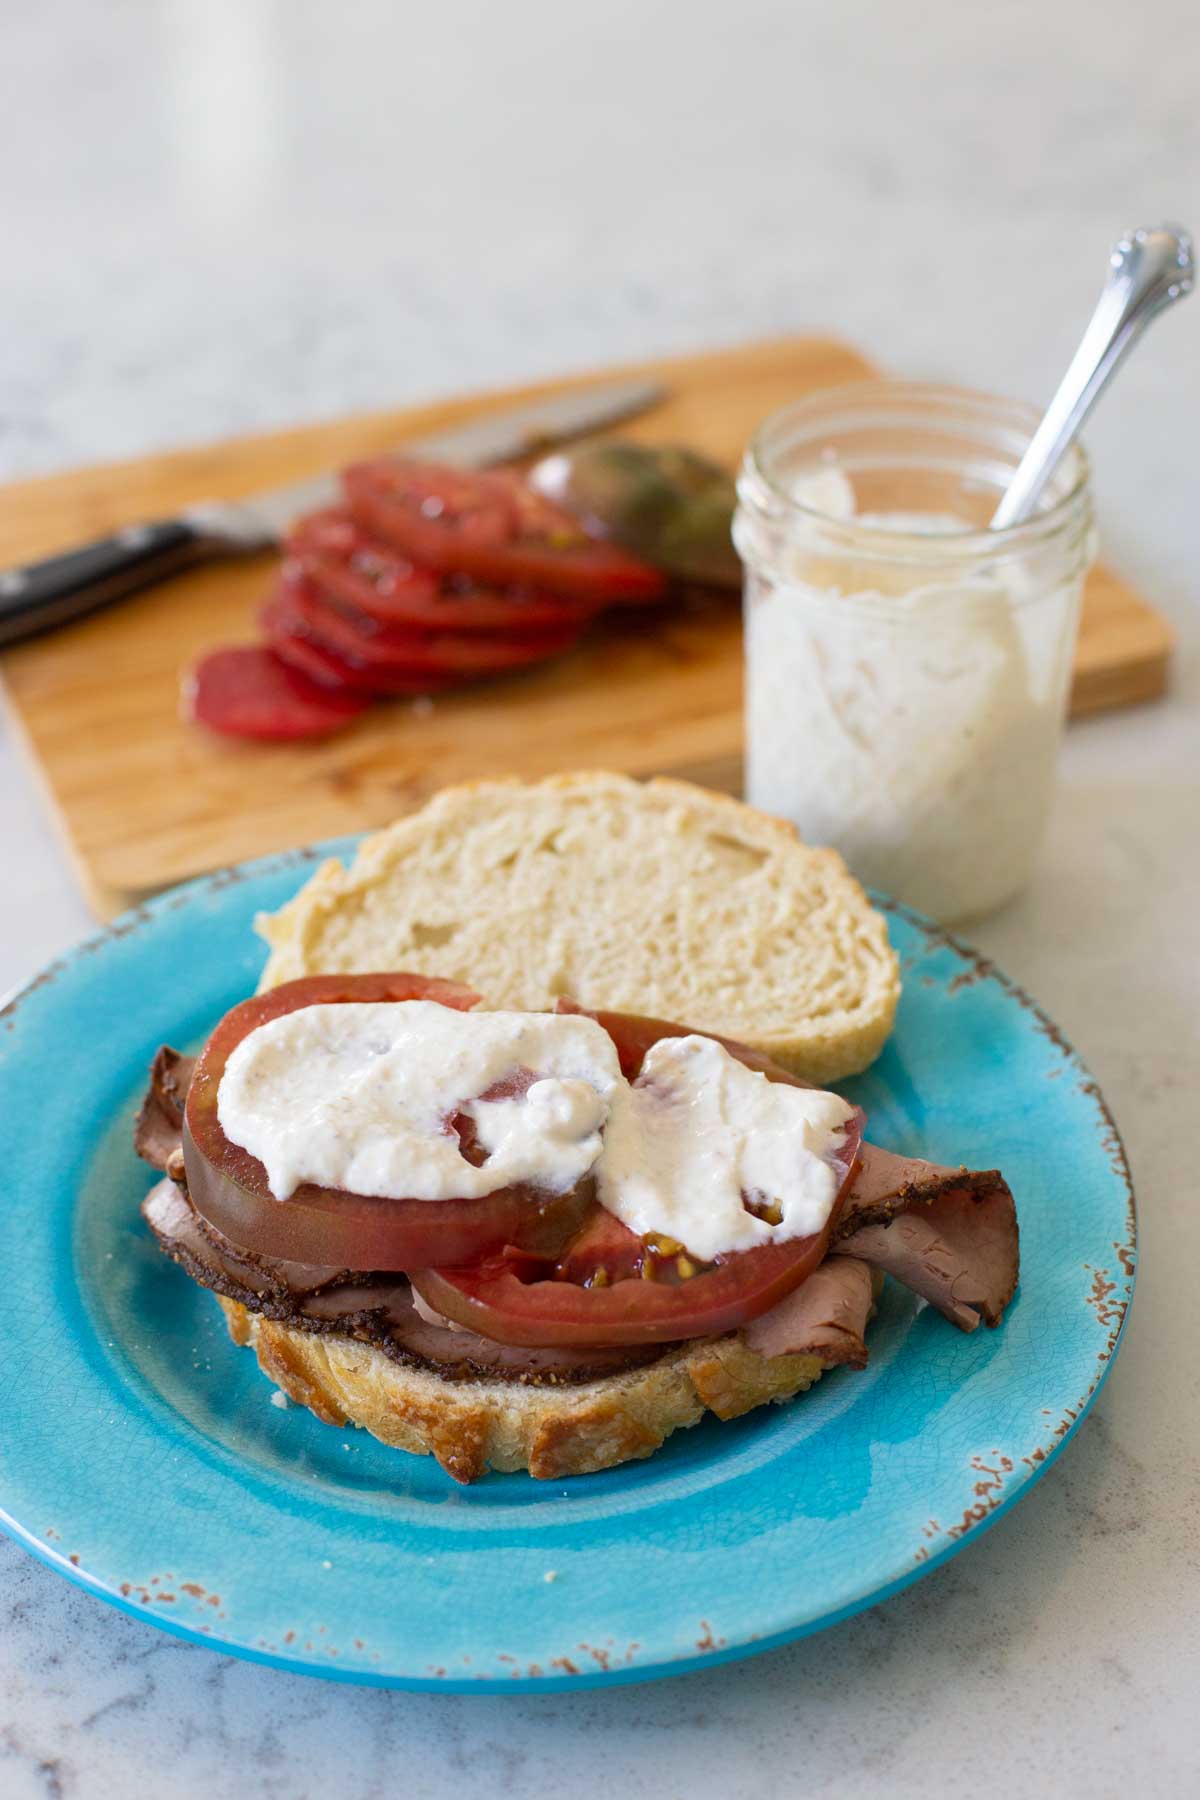 A sour cream horseradish sauce is spread over a roast beef sandwich with sliced tomatoes.